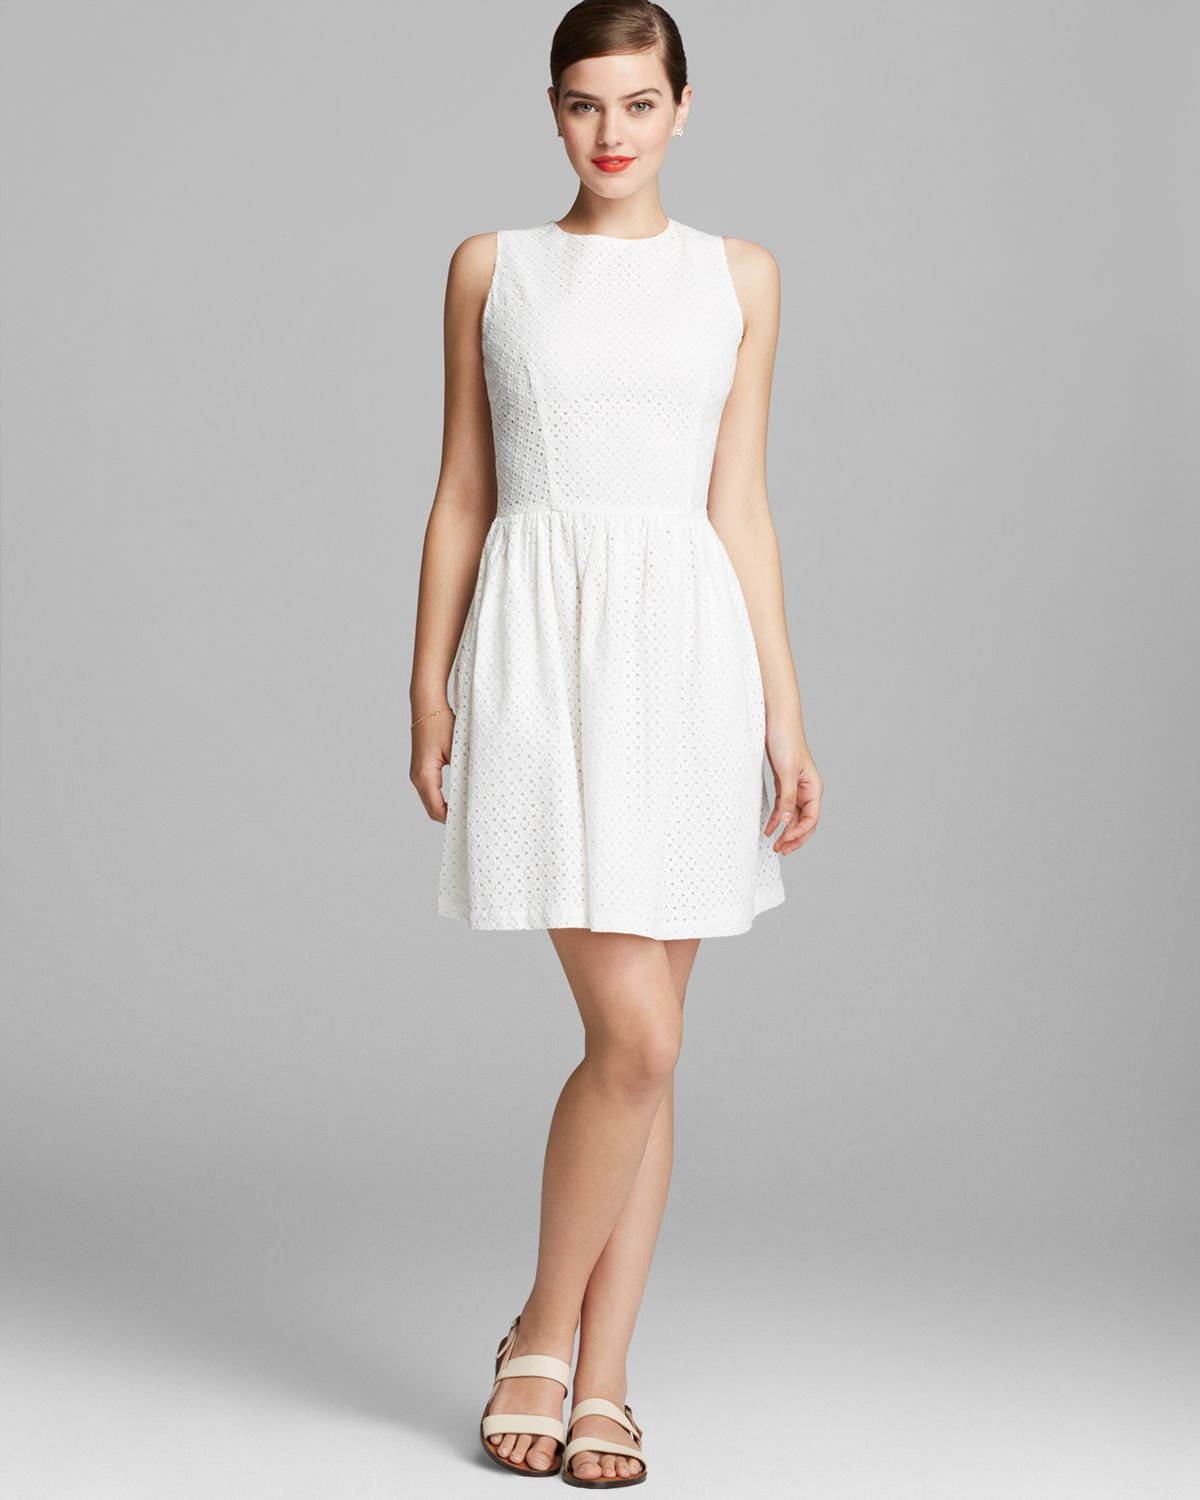 Lyst - French Connection Dress Sunflower Eyelet in White